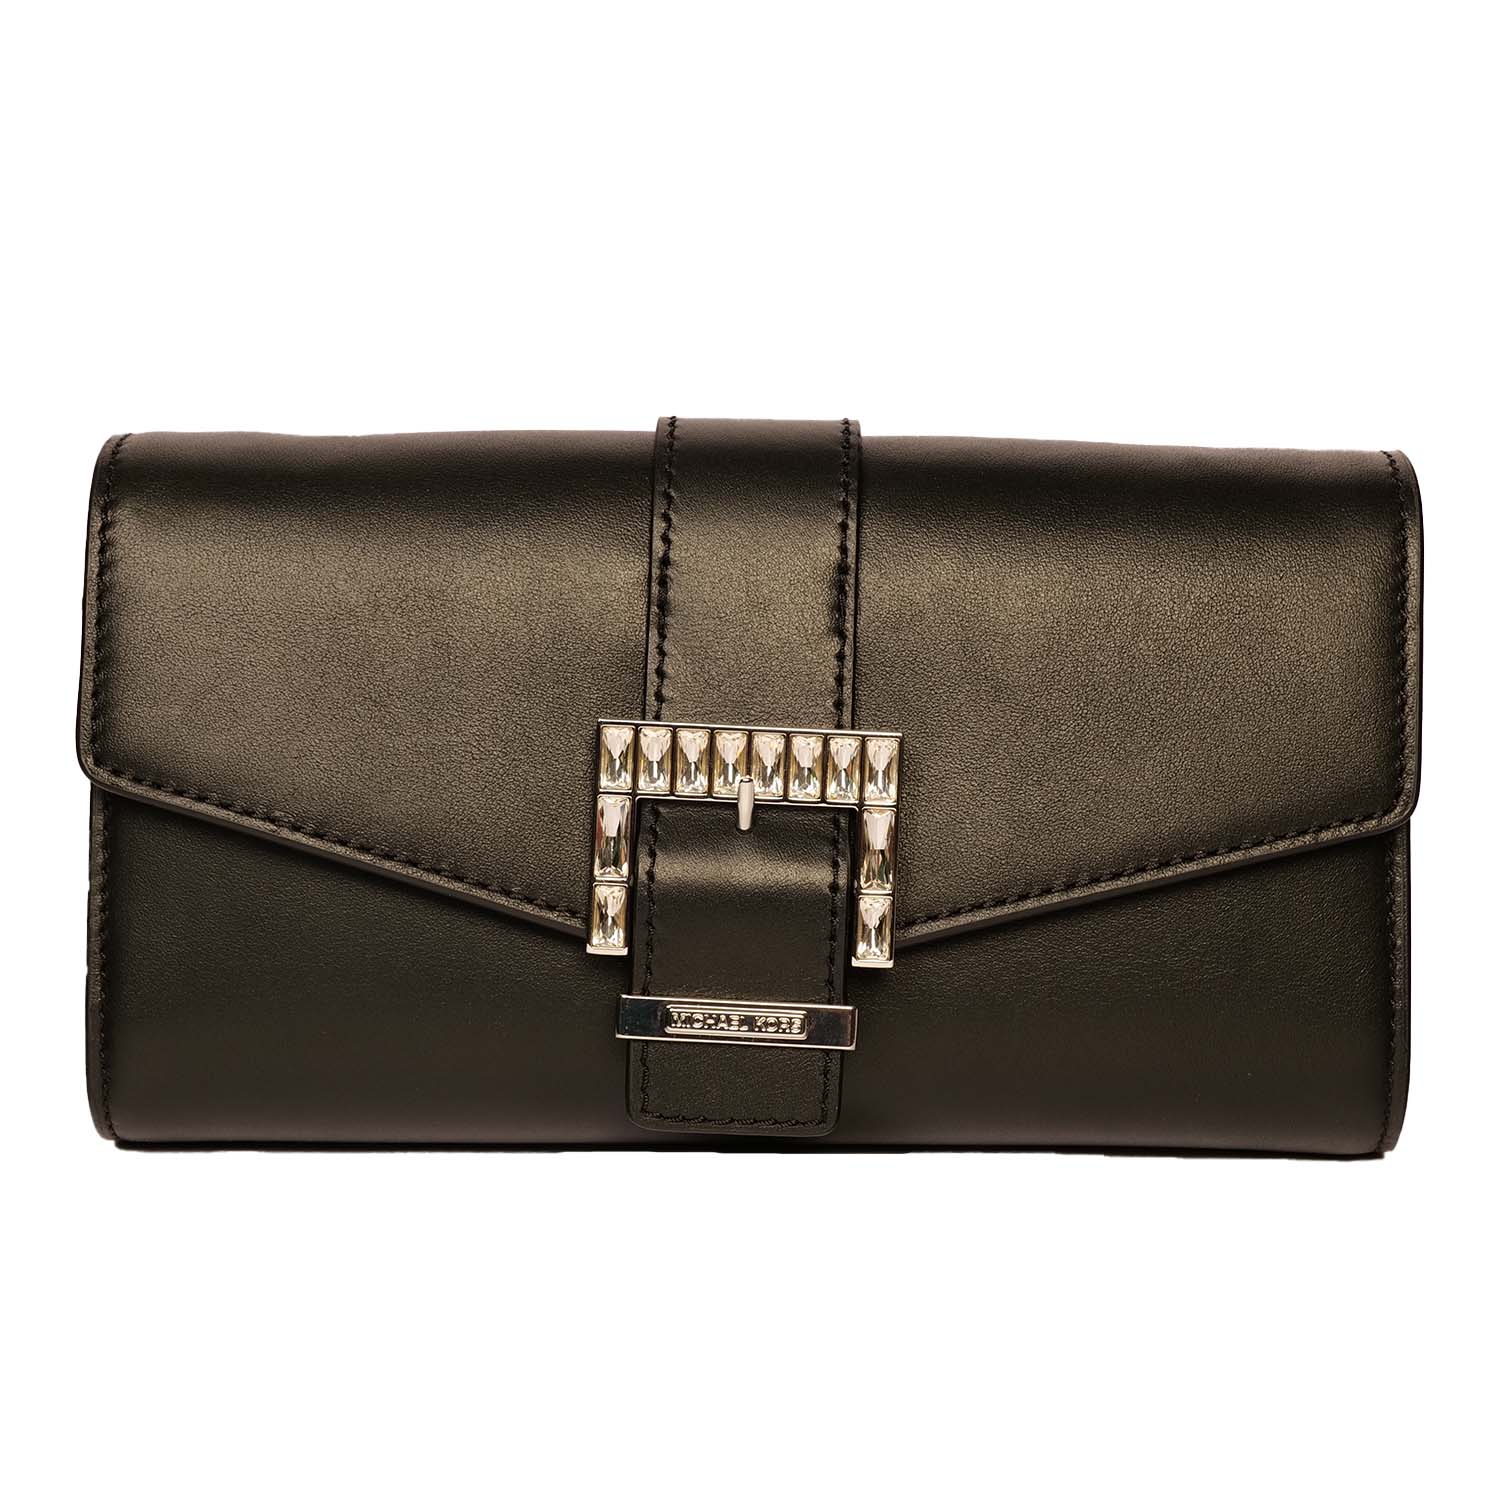 MICHAEL KORS: Michael Penelope clutch in smooth leather - Black